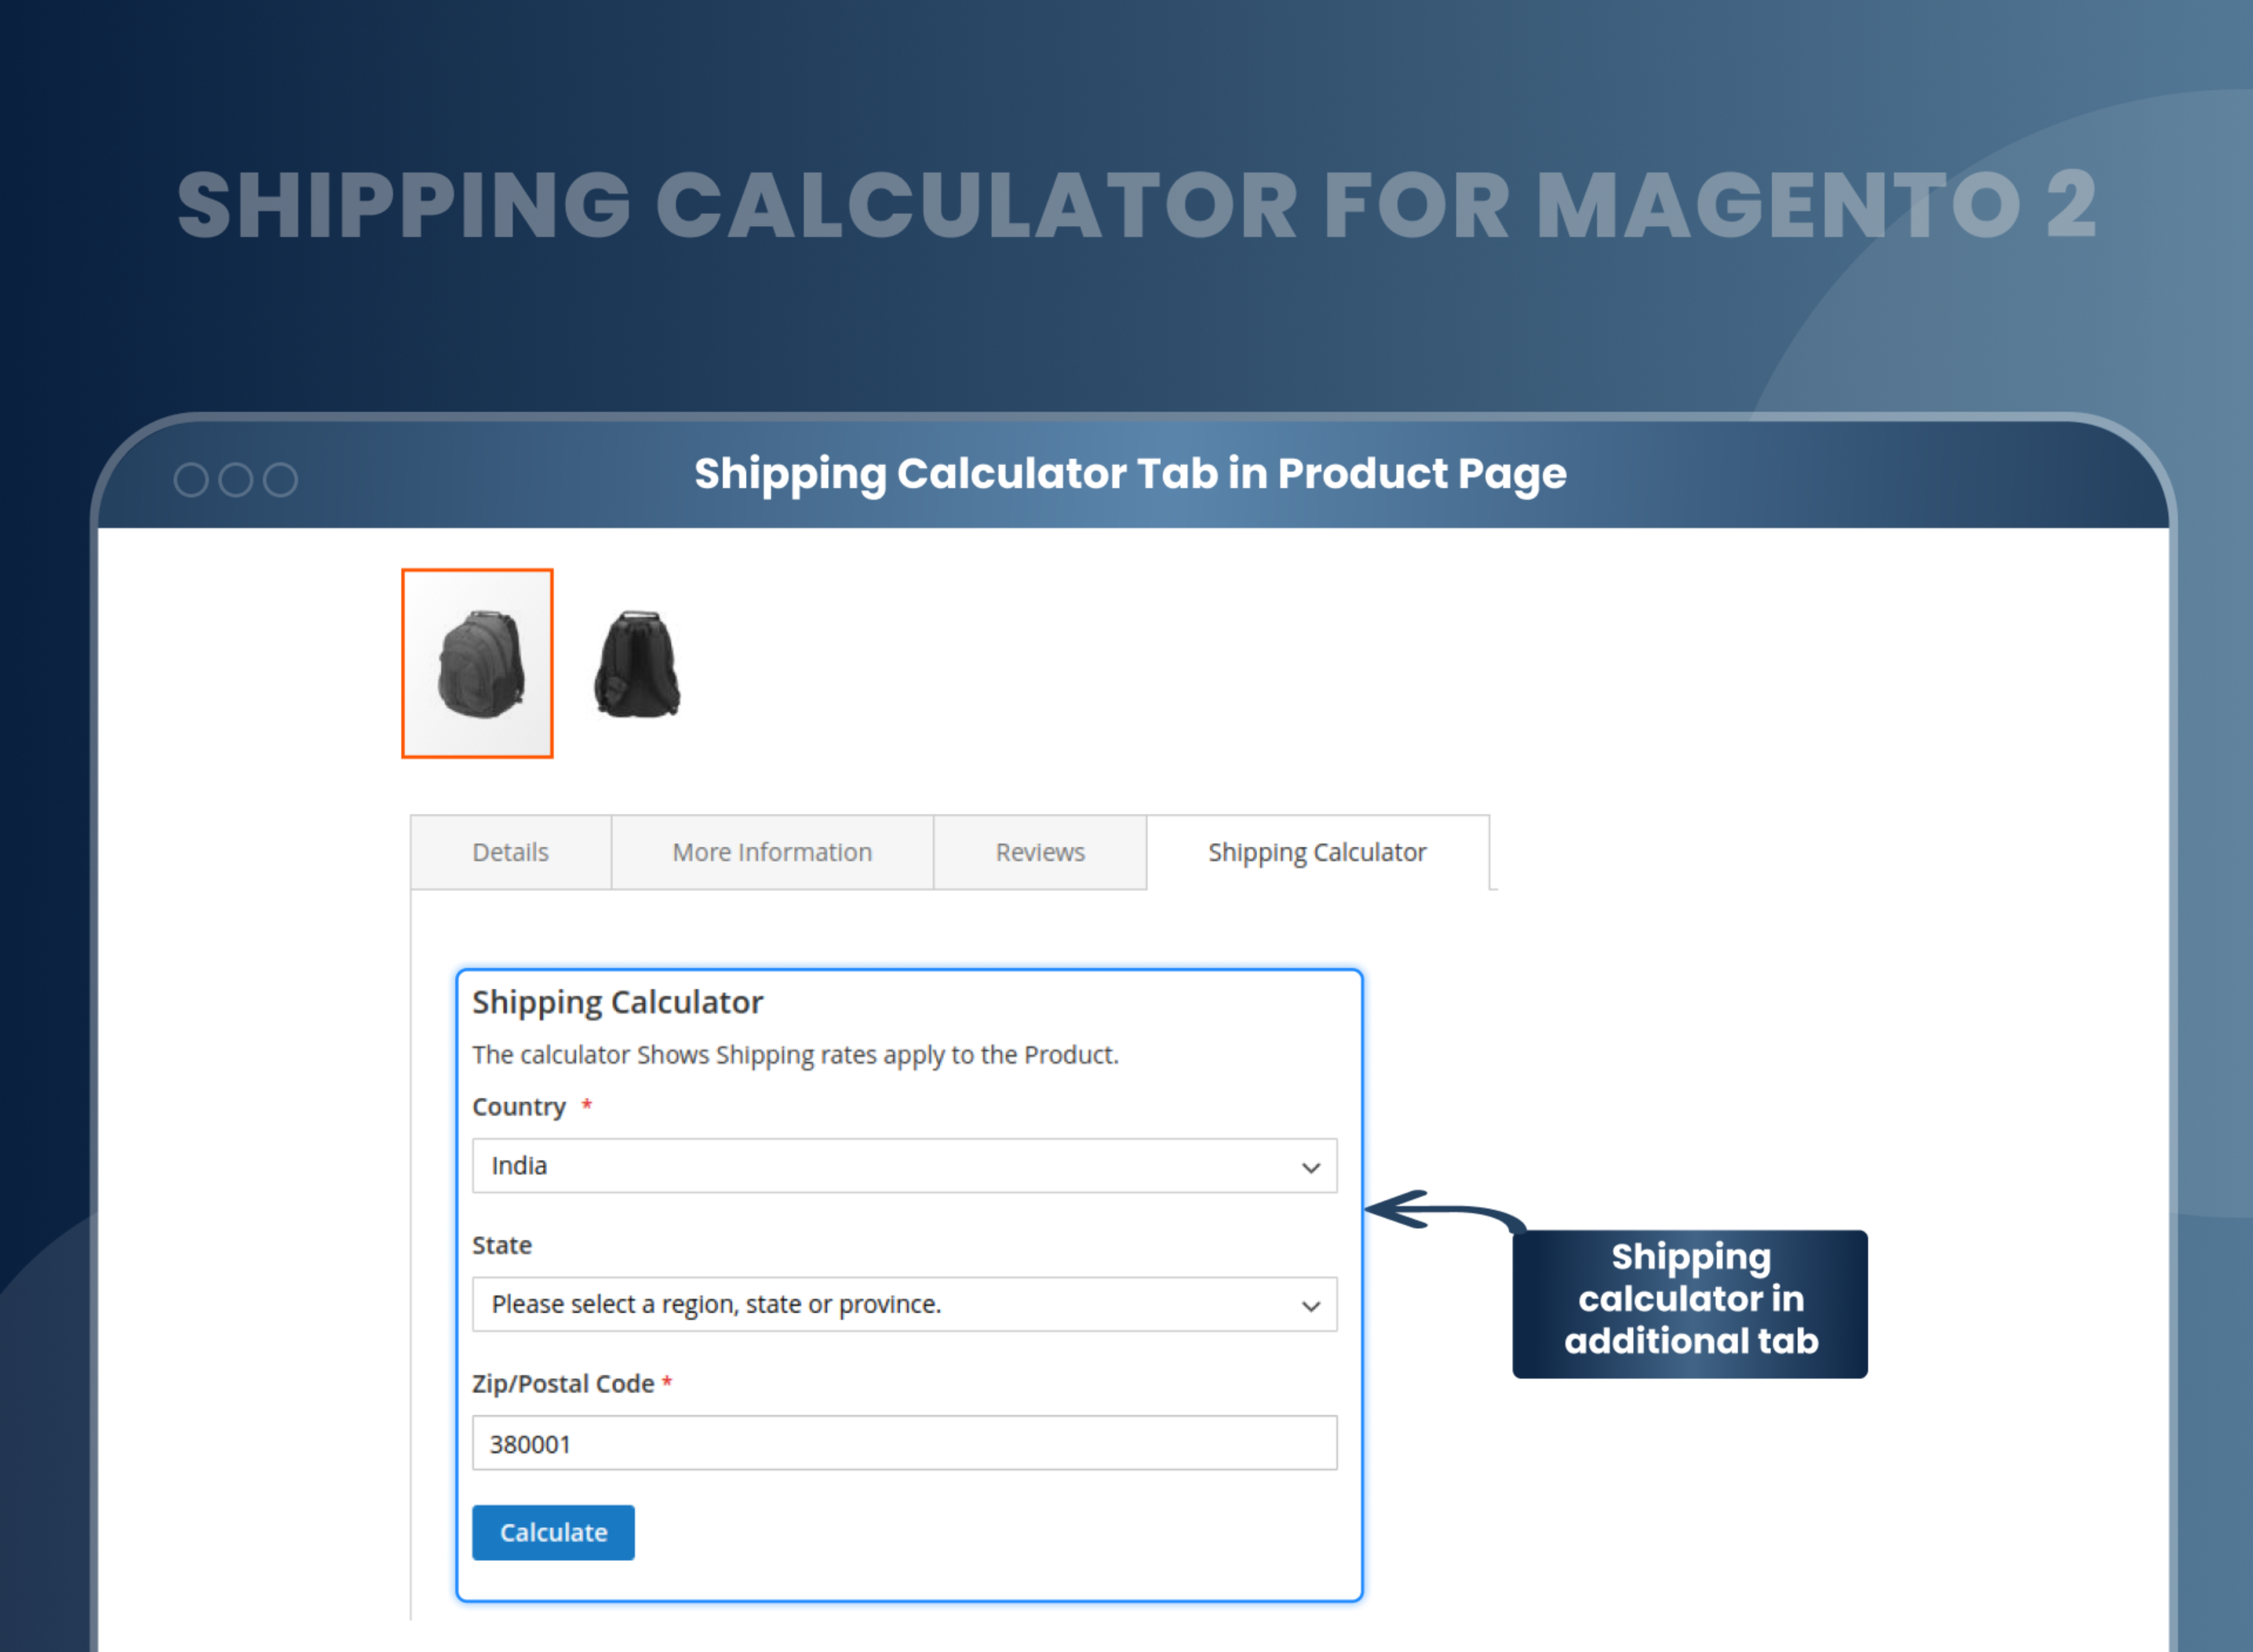 Shipping Calculator Tab in Product Page